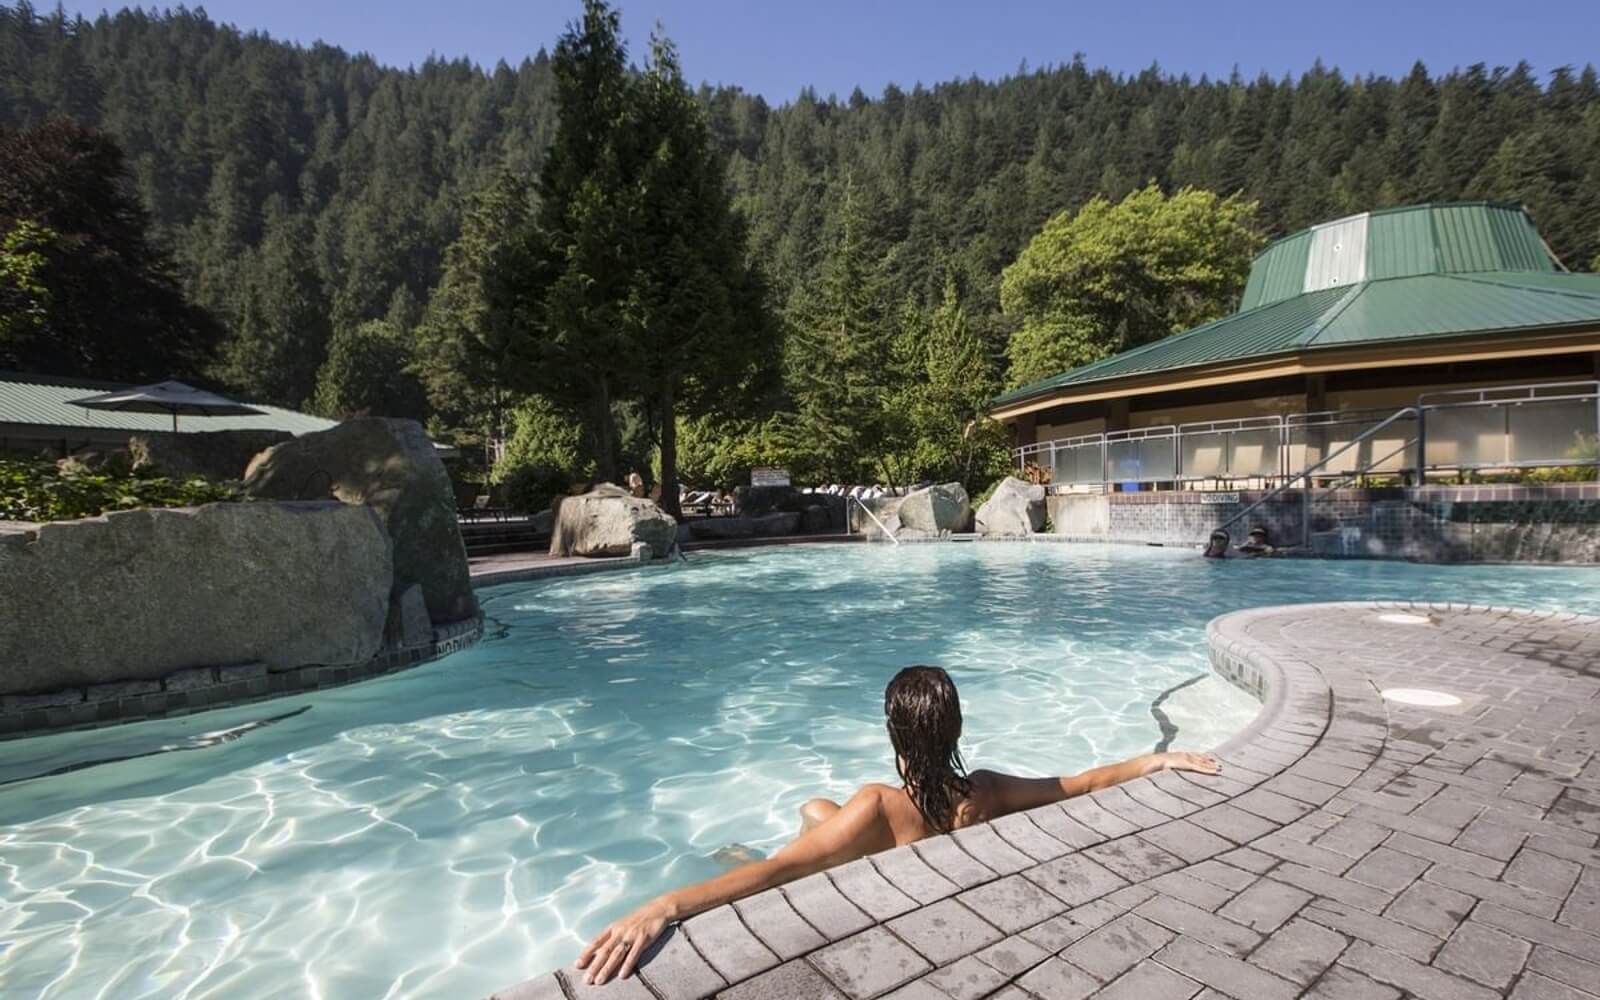 sunbather relaxing at harrison hot springs resort near vancouver bc